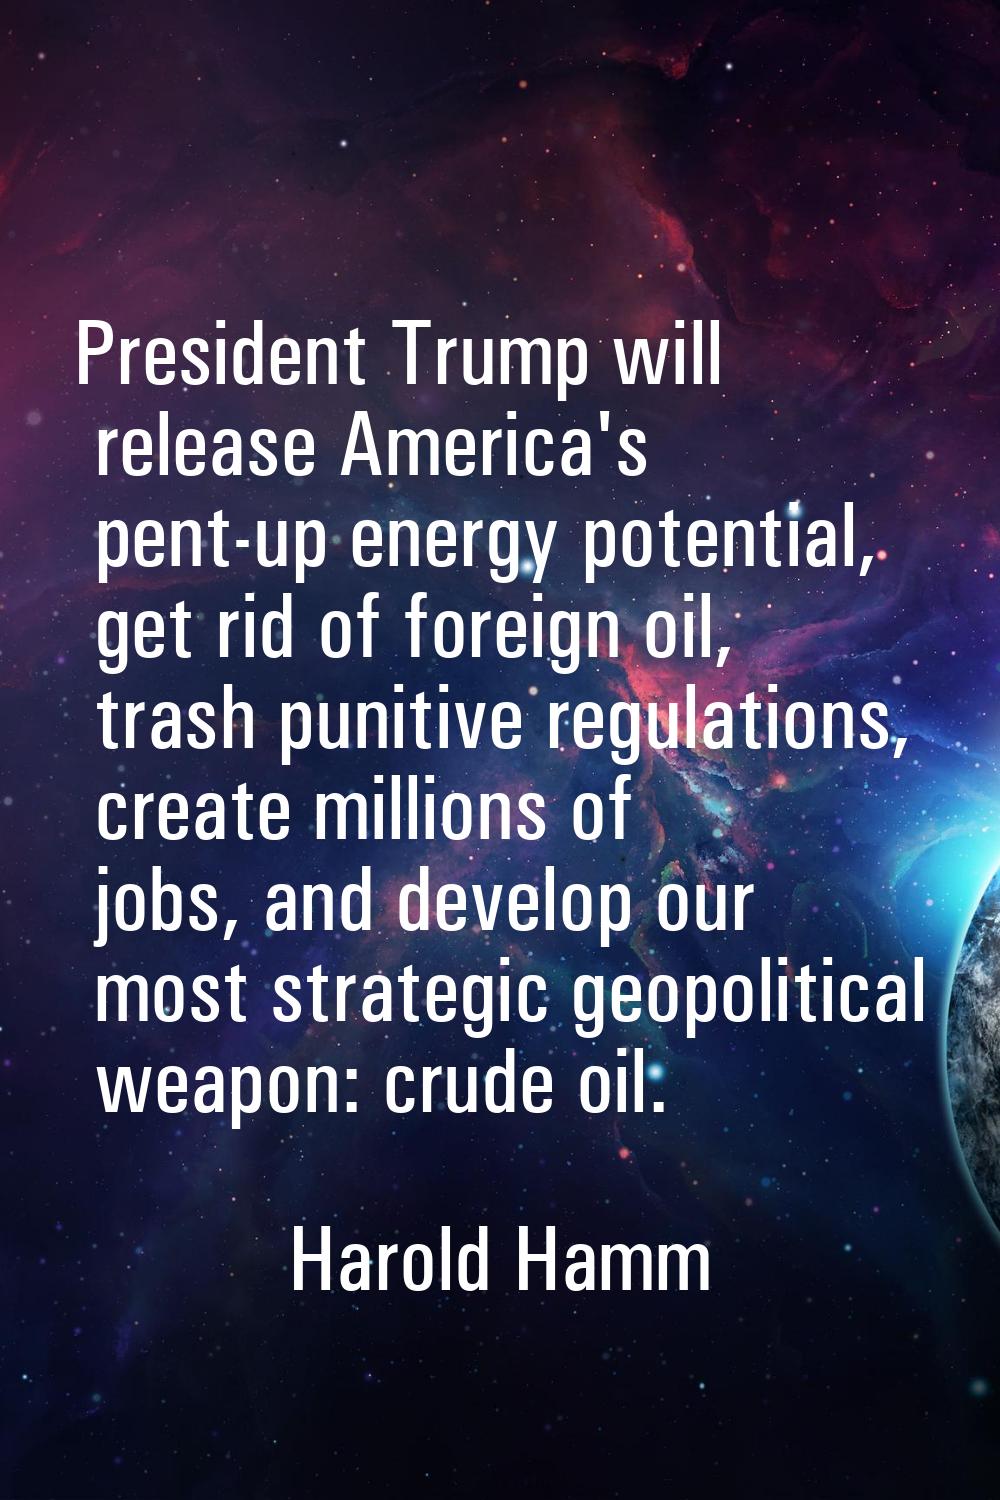 President Trump will release America's pent-up energy potential, get rid of foreign oil, trash puni